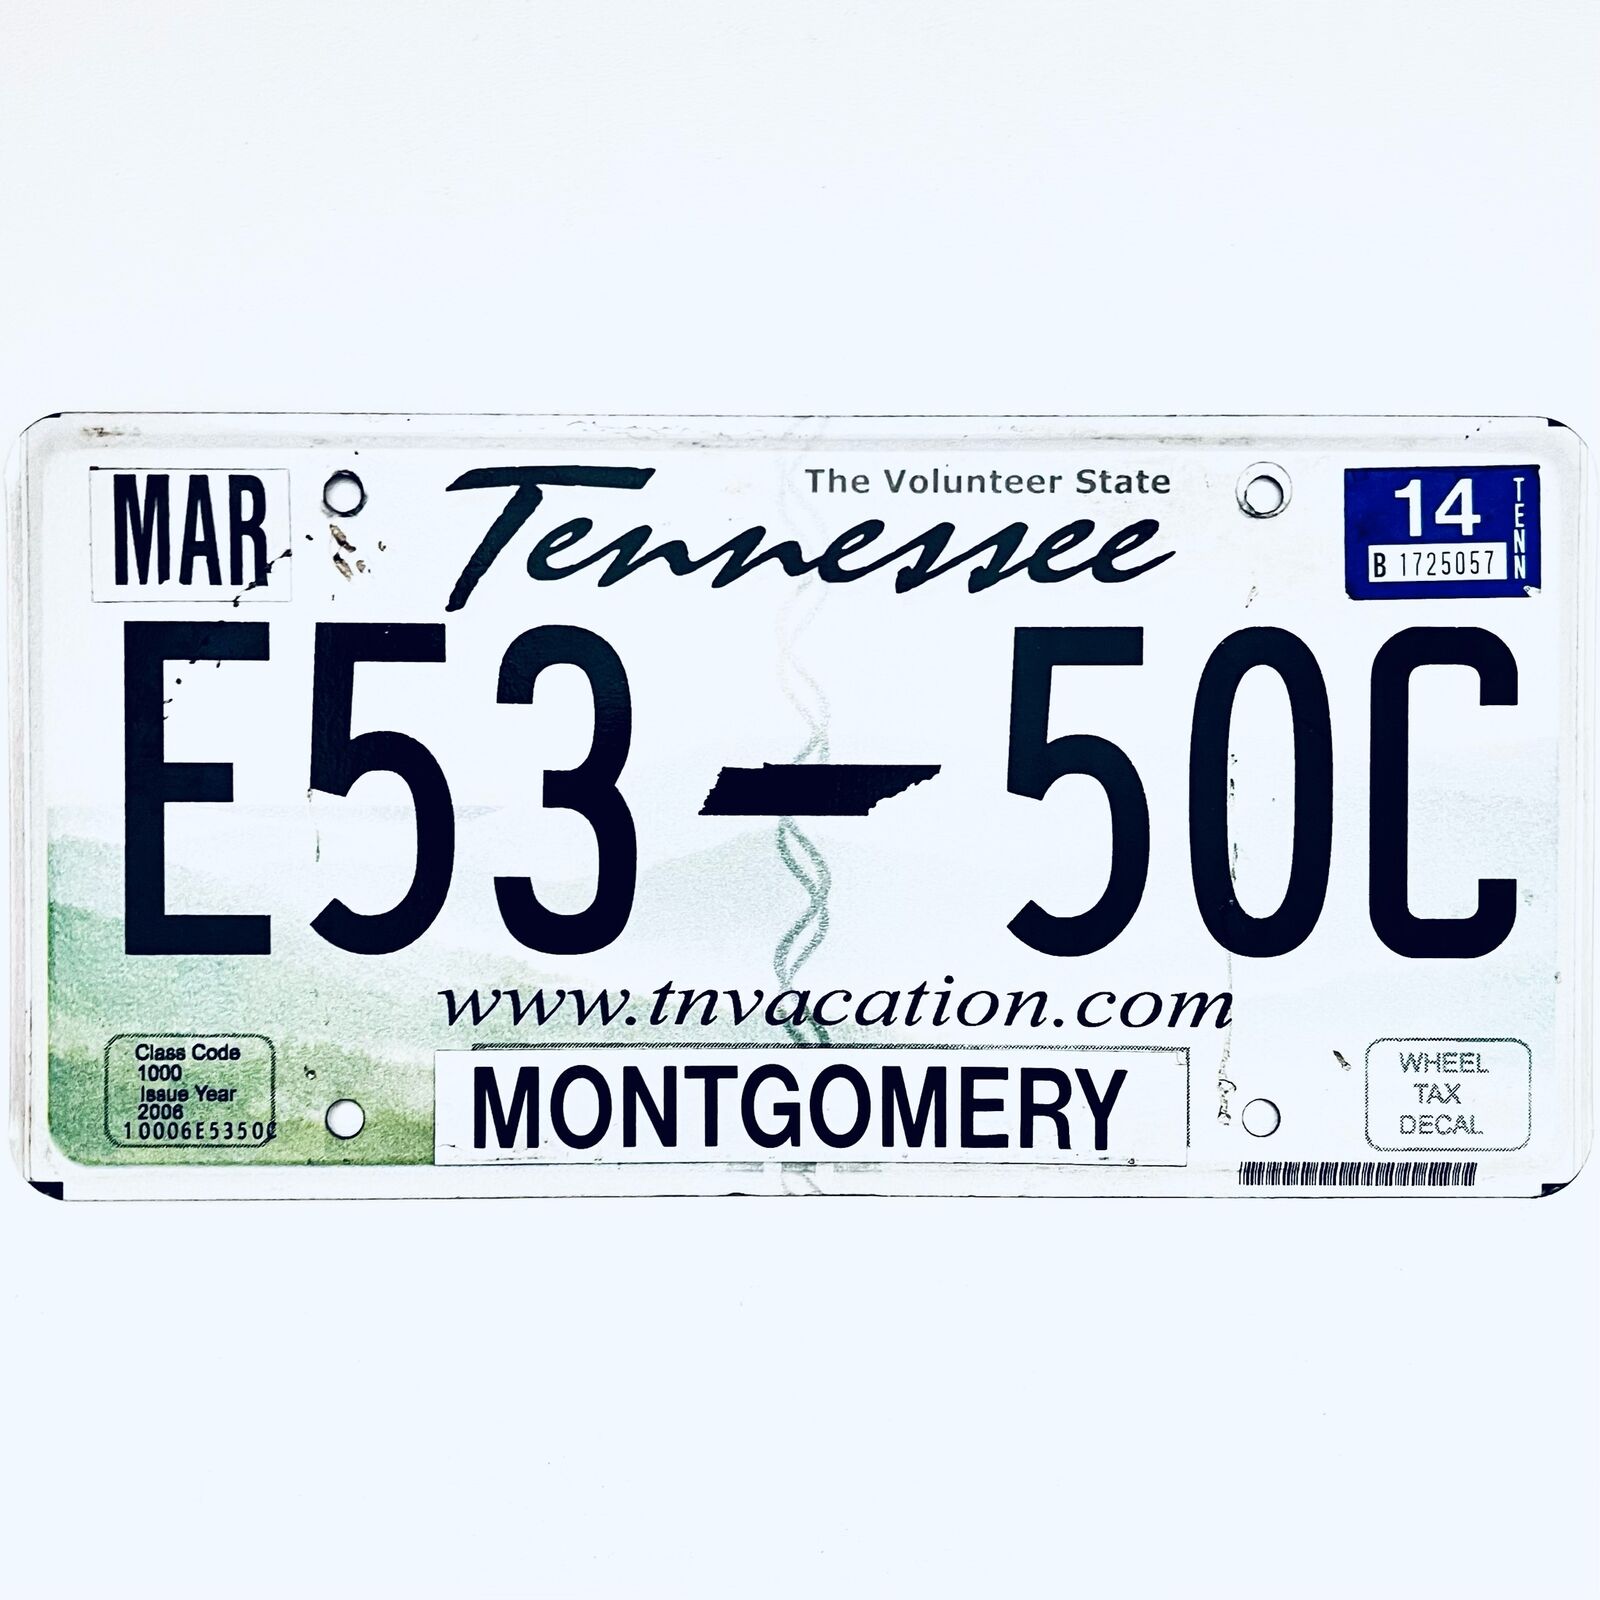 2014 United States Tennessee Montgomery County Passenger License Plate E53 50C